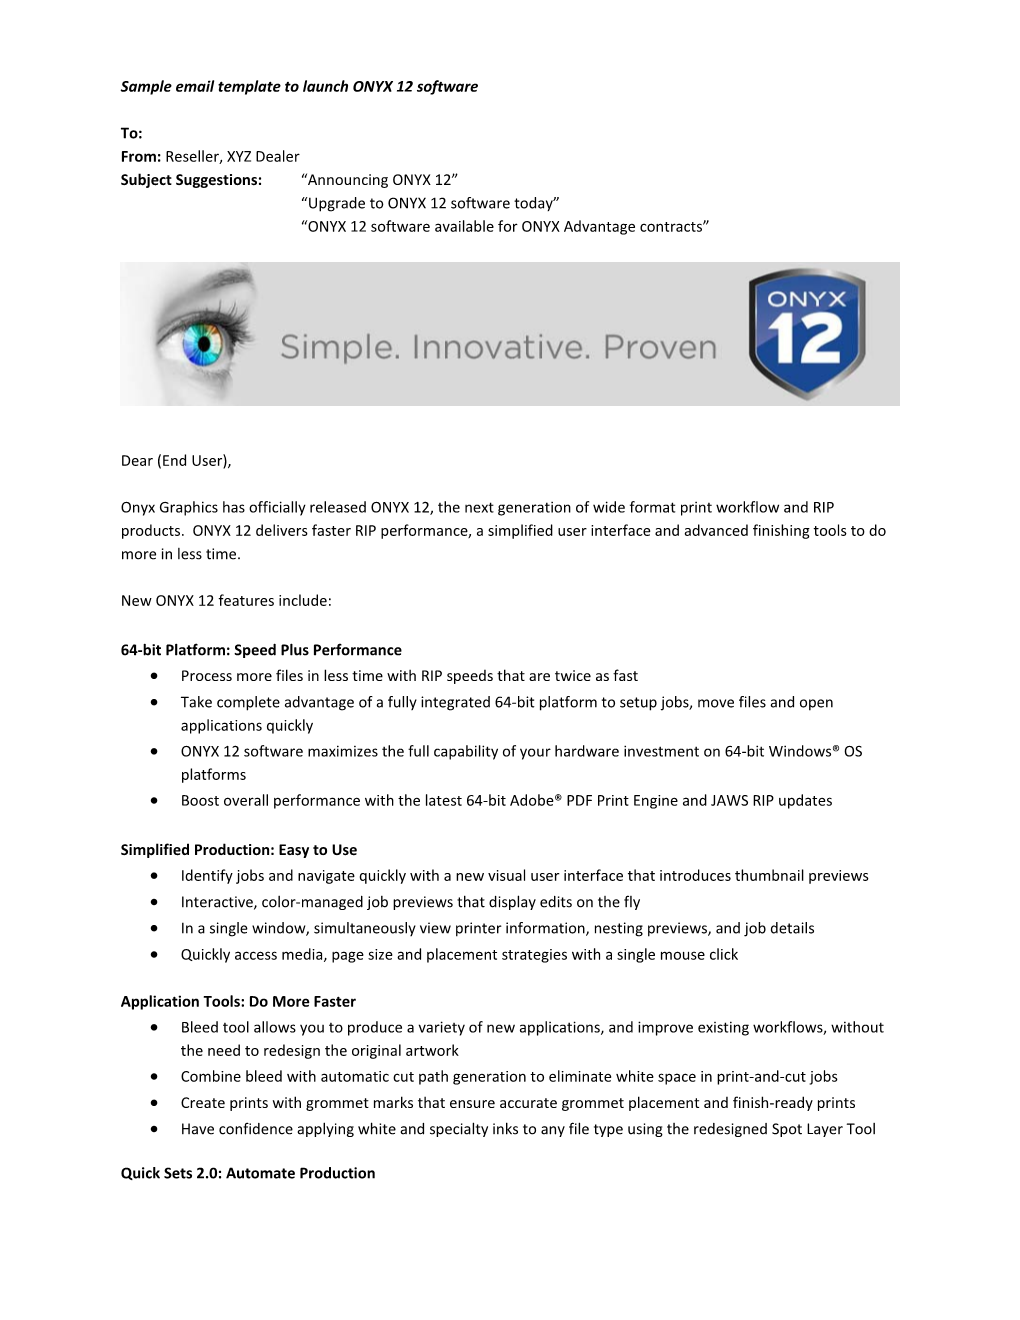 Sample Email Template to Launch ONYX 12 Software